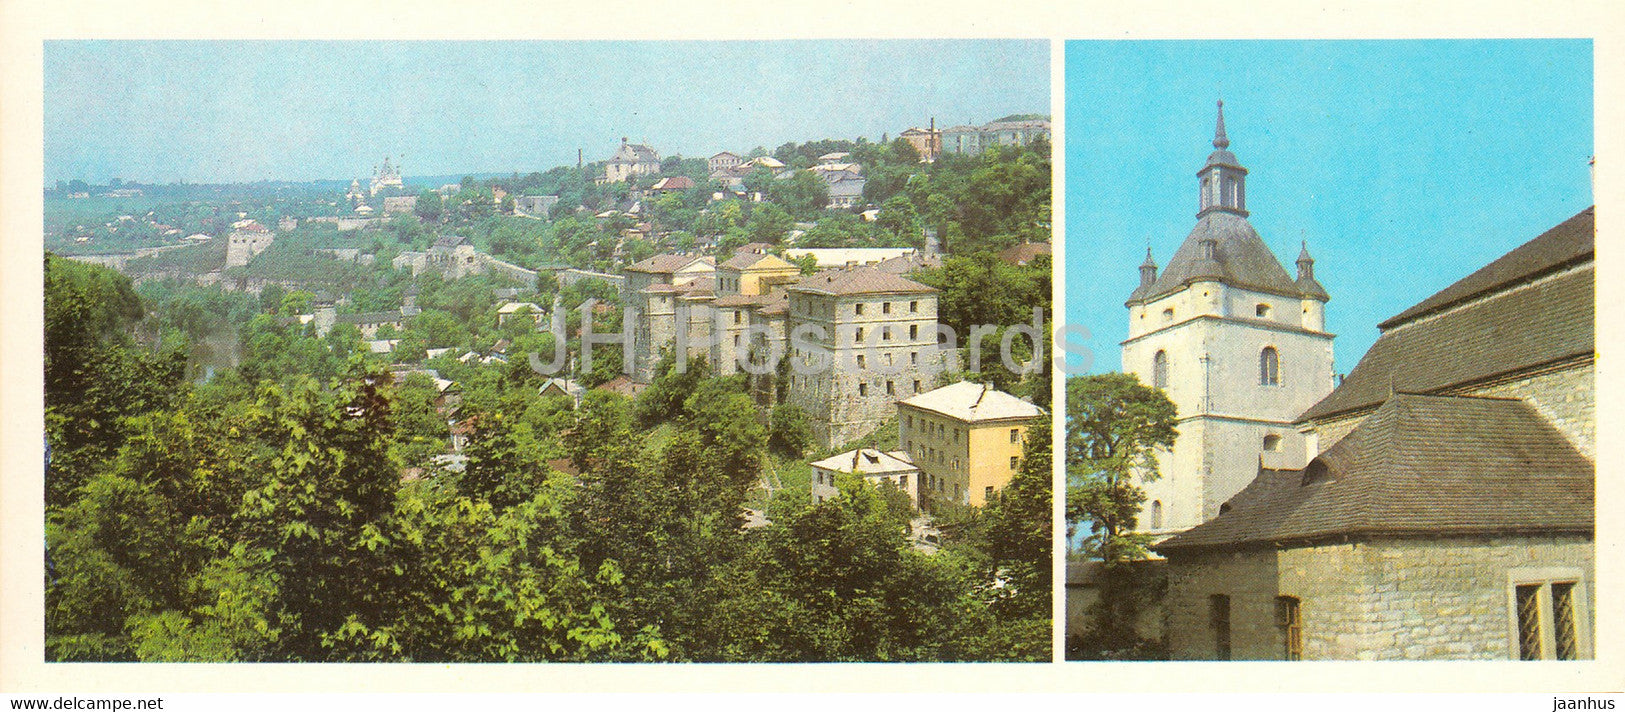 Kamianets Podilskyi - Khmelnytskyi Region - View at Old Town from South East - belfry - 1984 - Ukraine USSR - unused - JH Postcards